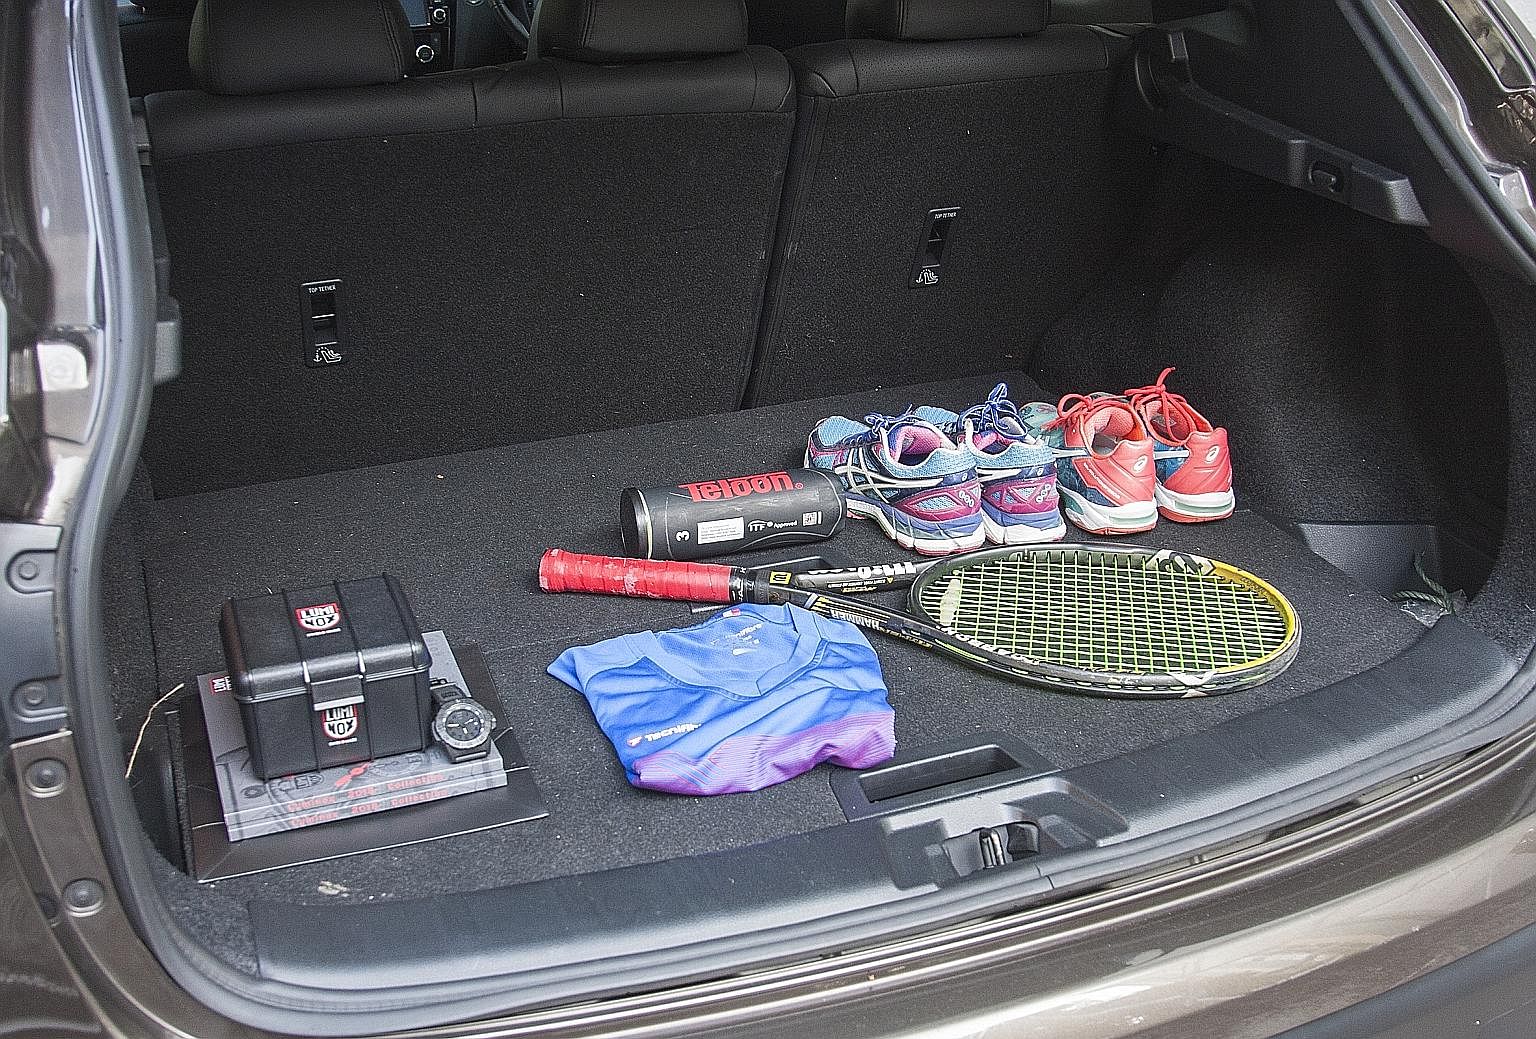 The roomy Nissan Qashqai is especially handy for Ms Pamela Tan when she has to transport large items for work.